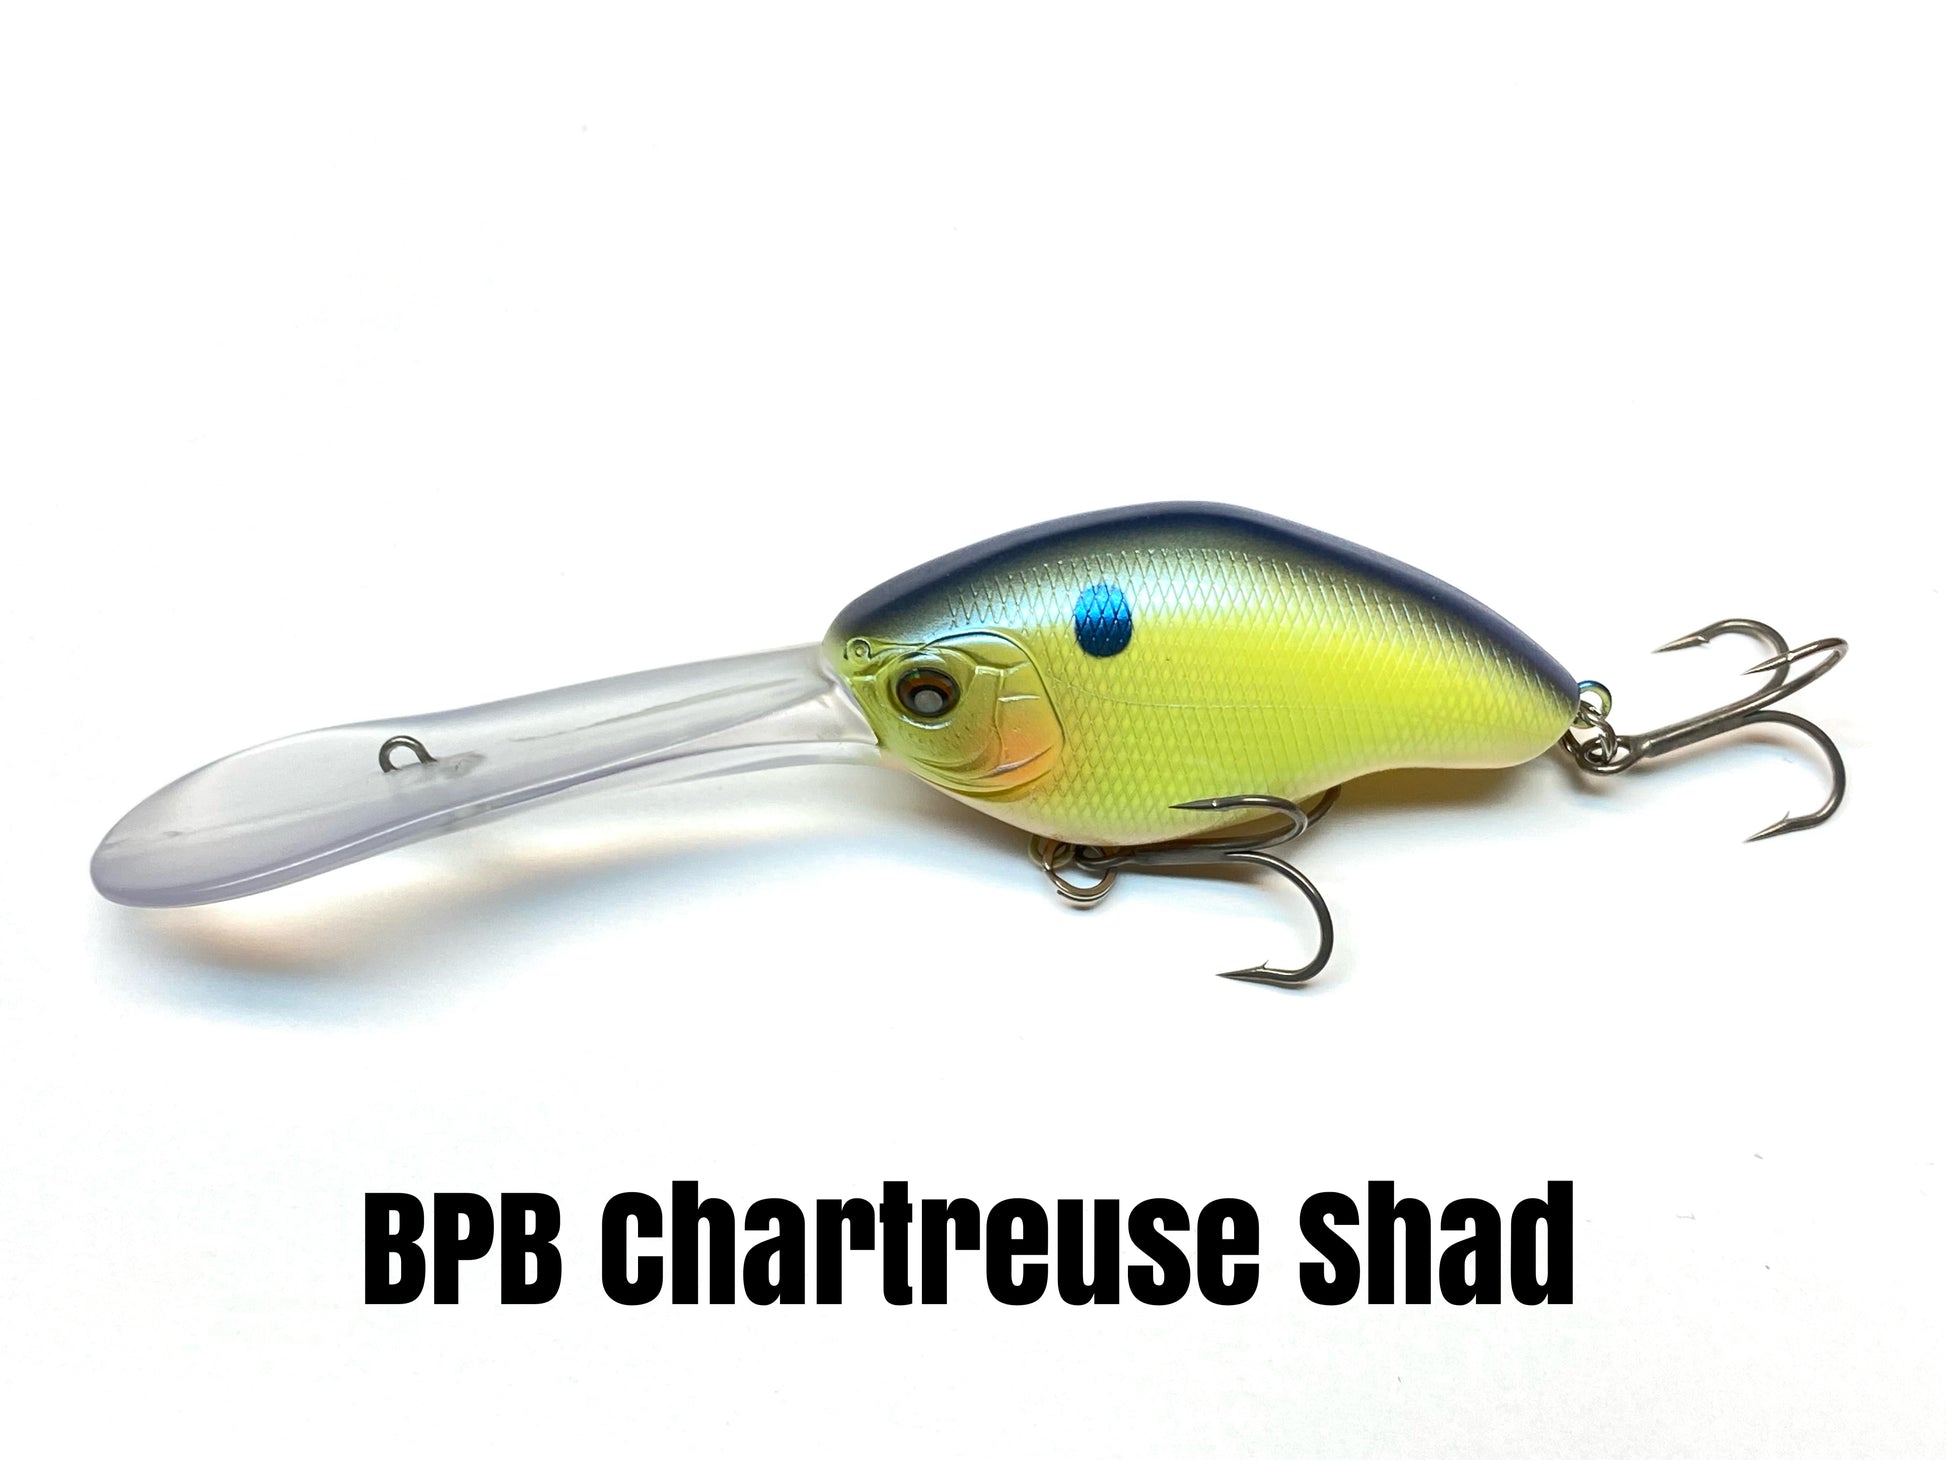 Nishine Lure Works Chippawa RB DD Blade Crankbait Product Review